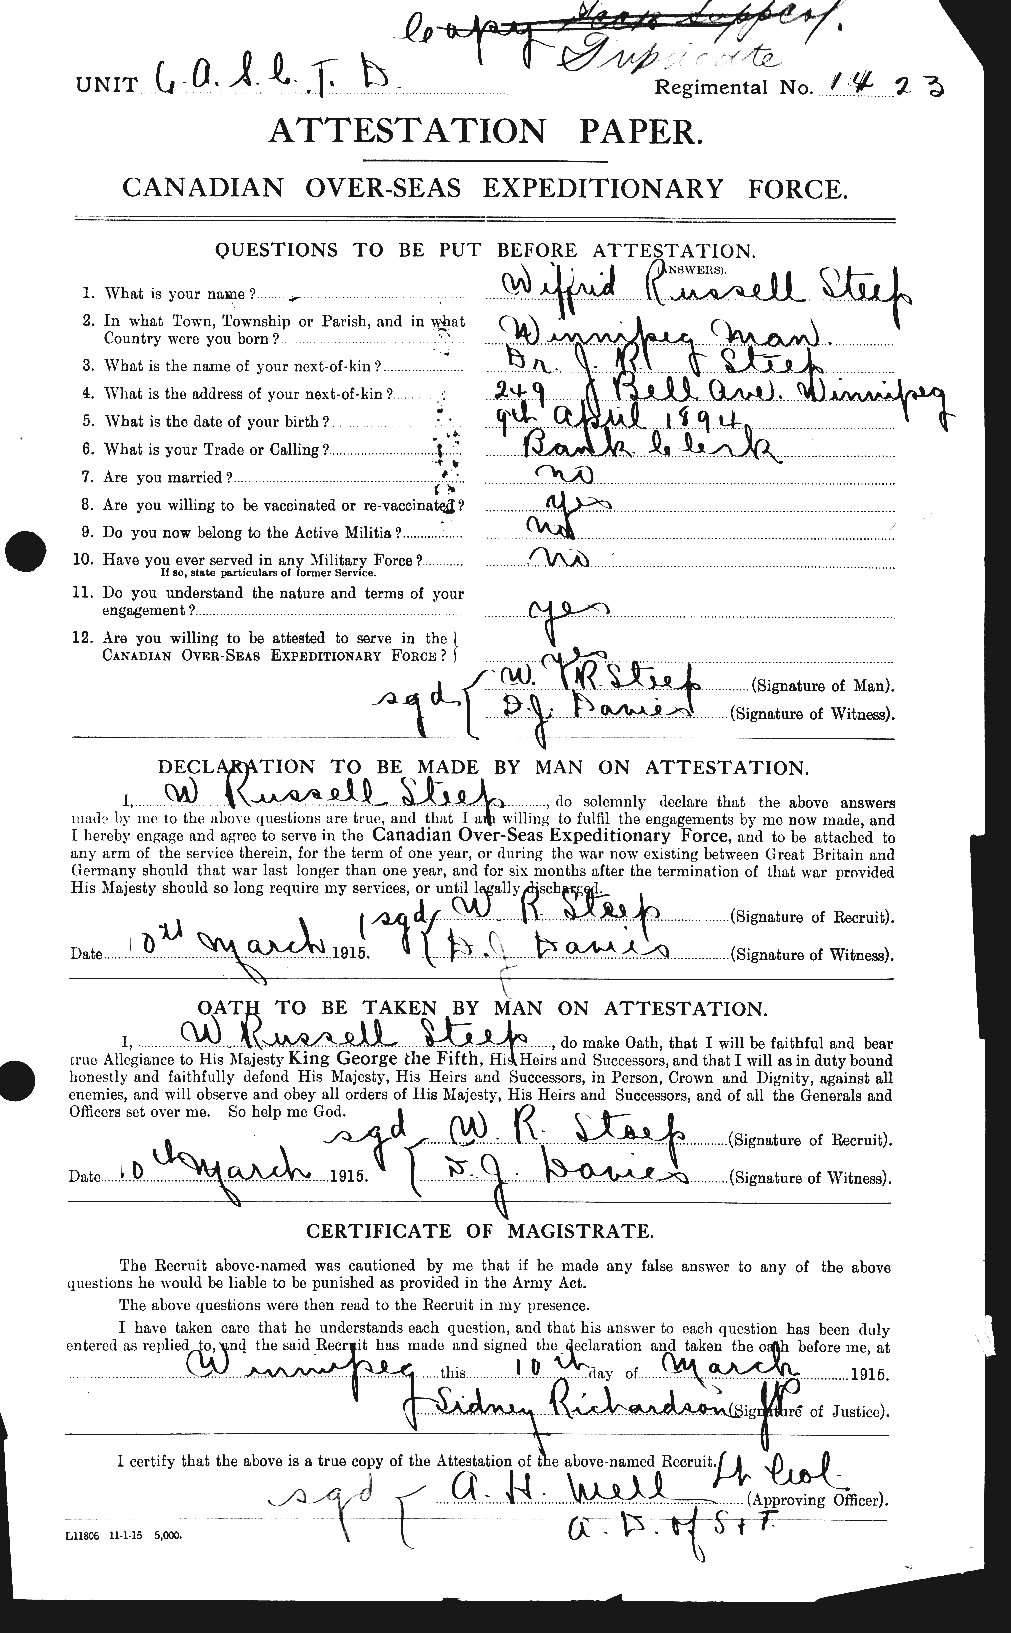 Personnel Records of the First World War - CEF 114798a